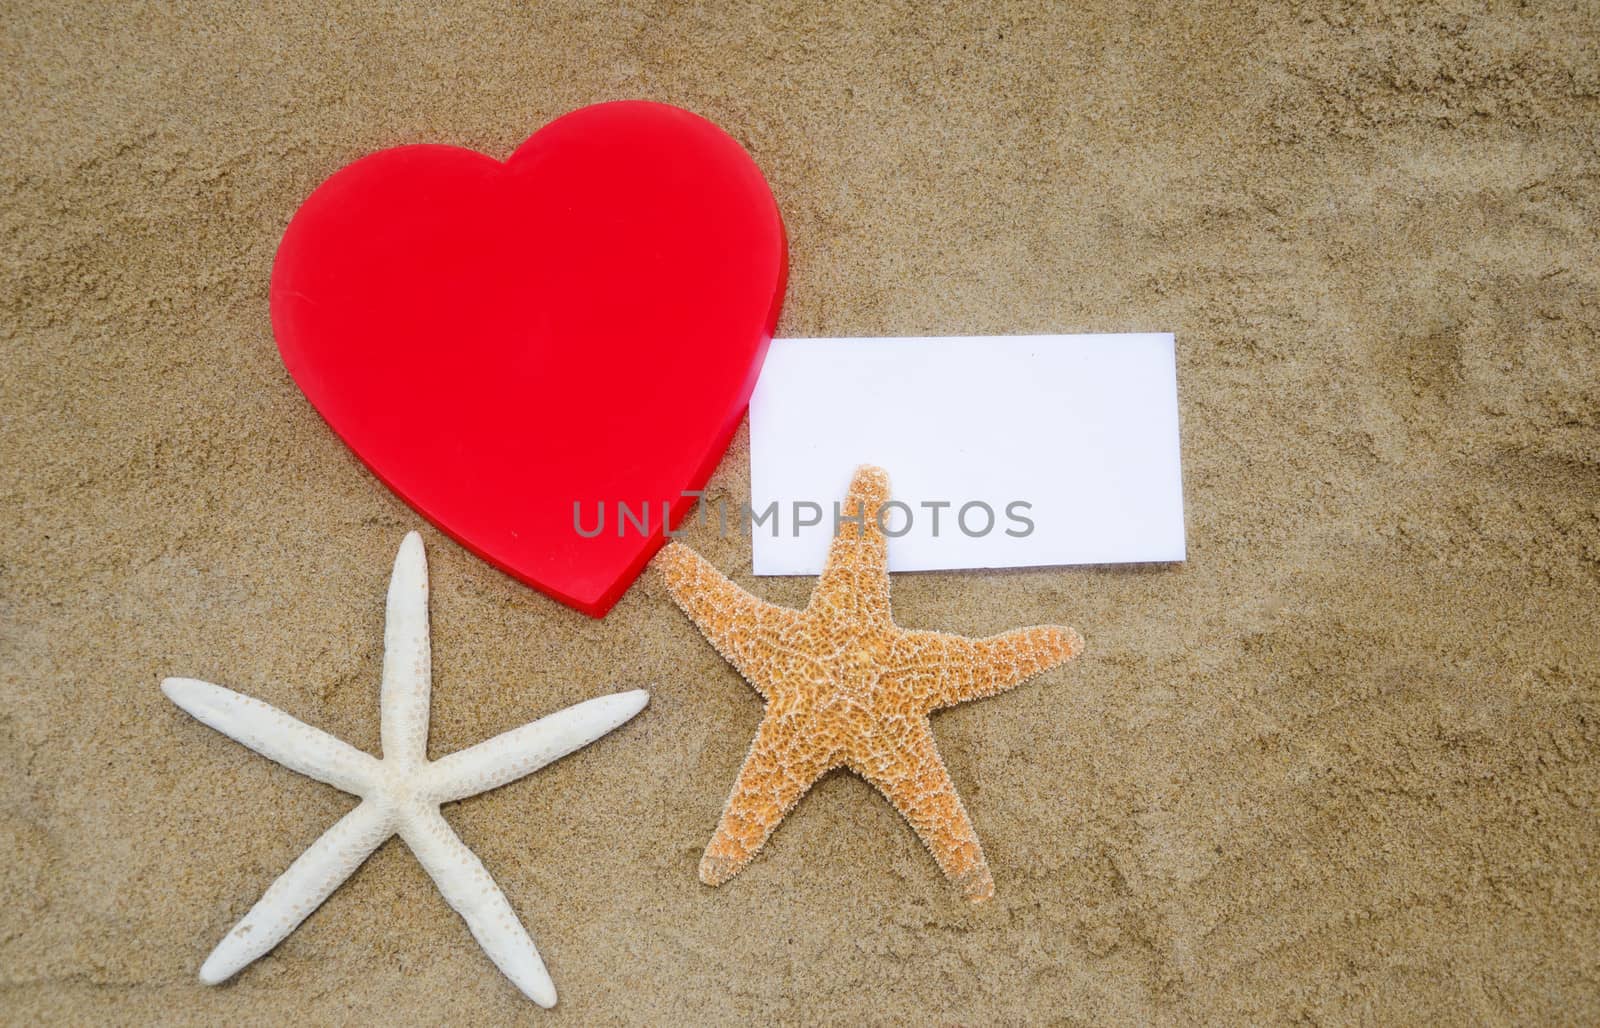 Red Heart shape, two starfishes, and piece of paper on the sandy beach